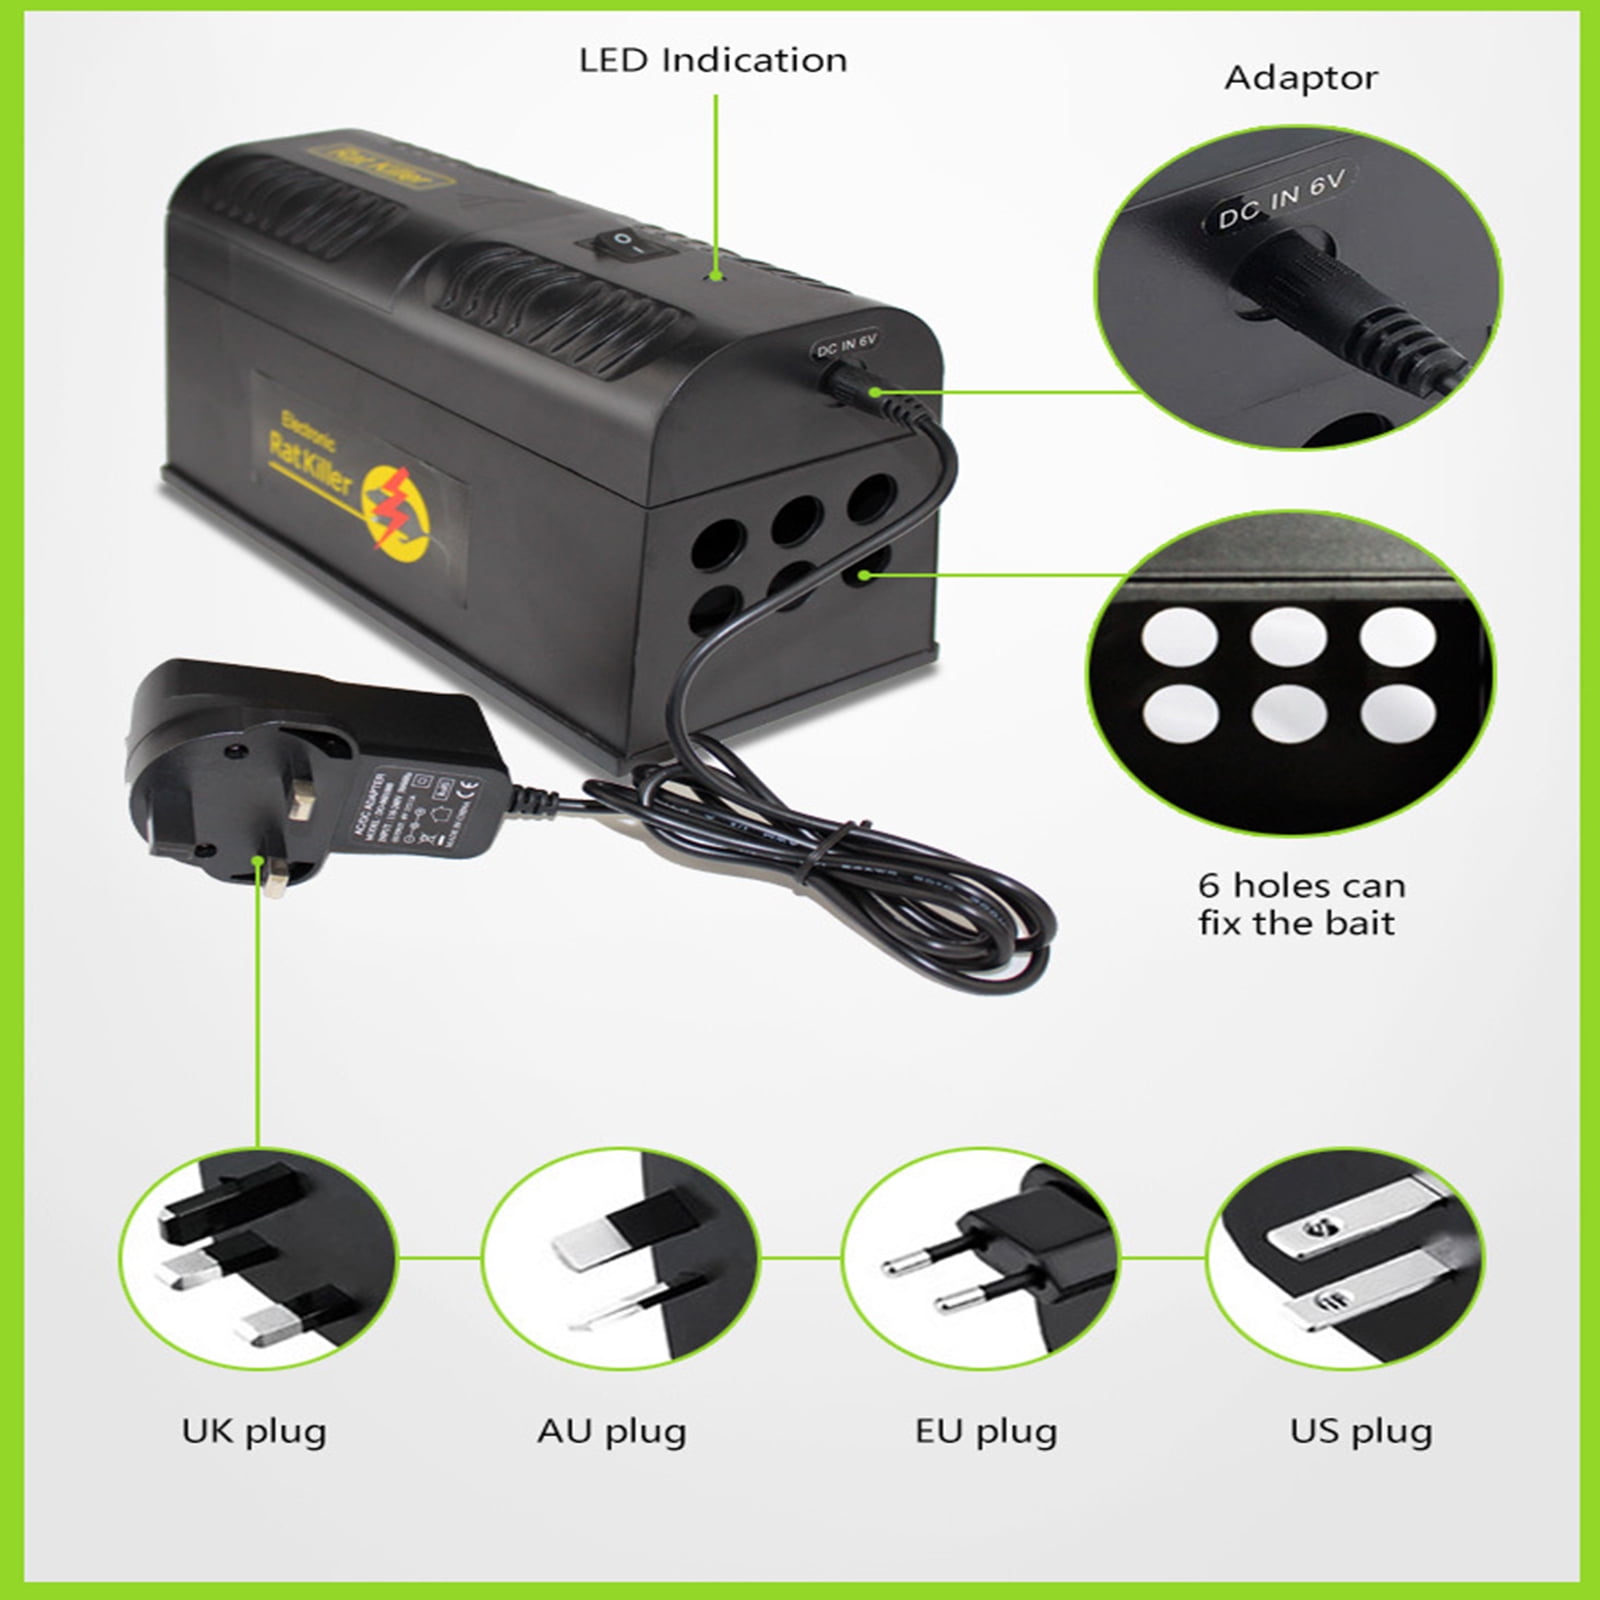 AC 110-240V 50-60Hz High Quality Electrocute Electronic Rat Trap Mice Mouse  Rodent Killer Electric Shock EU Plug Adapter High Voltage